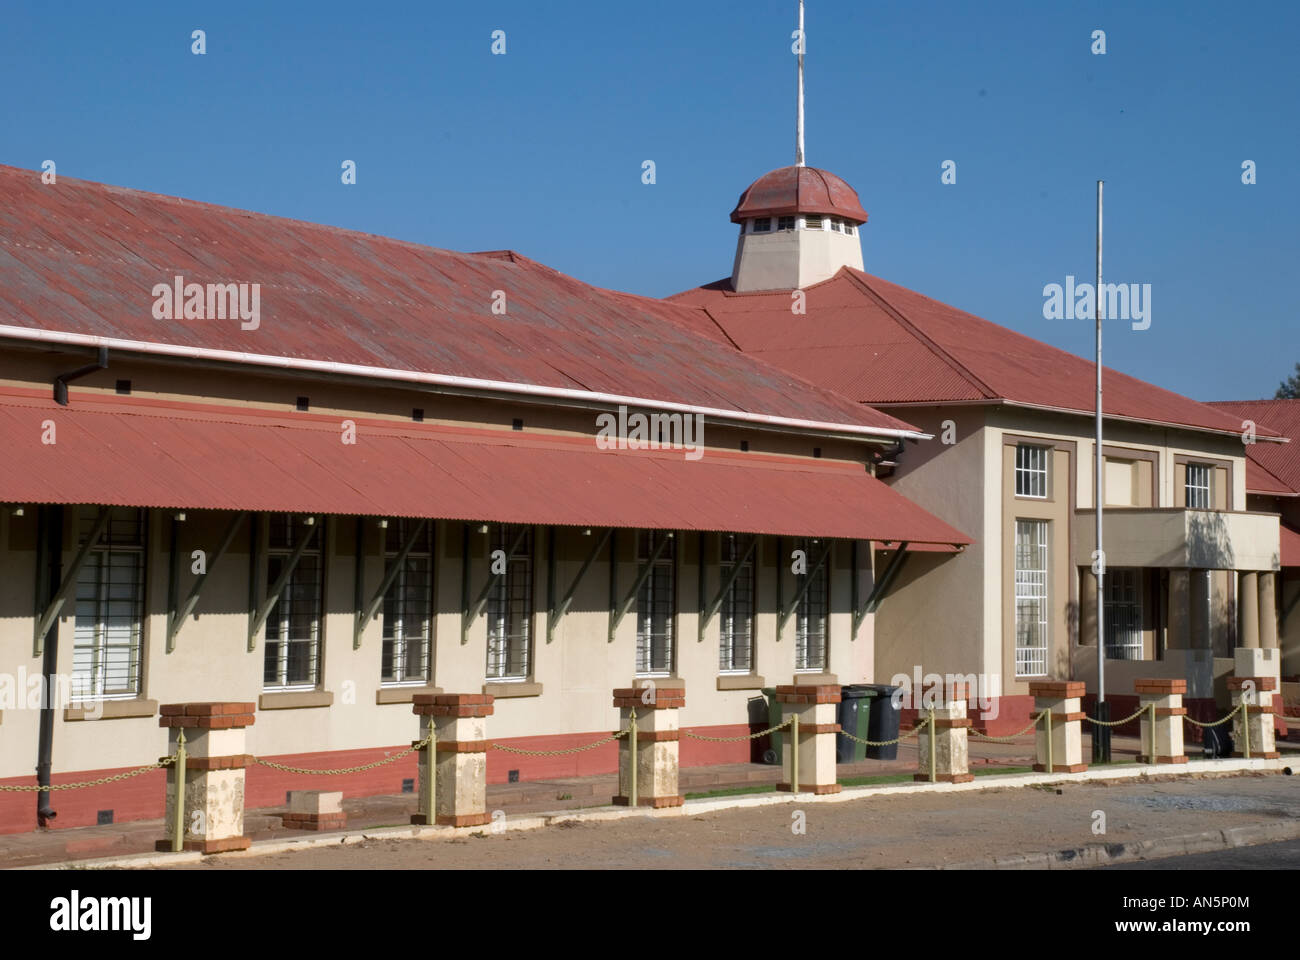 Kaiserliche realschule, Windhoek, in Namibia Foto Stock